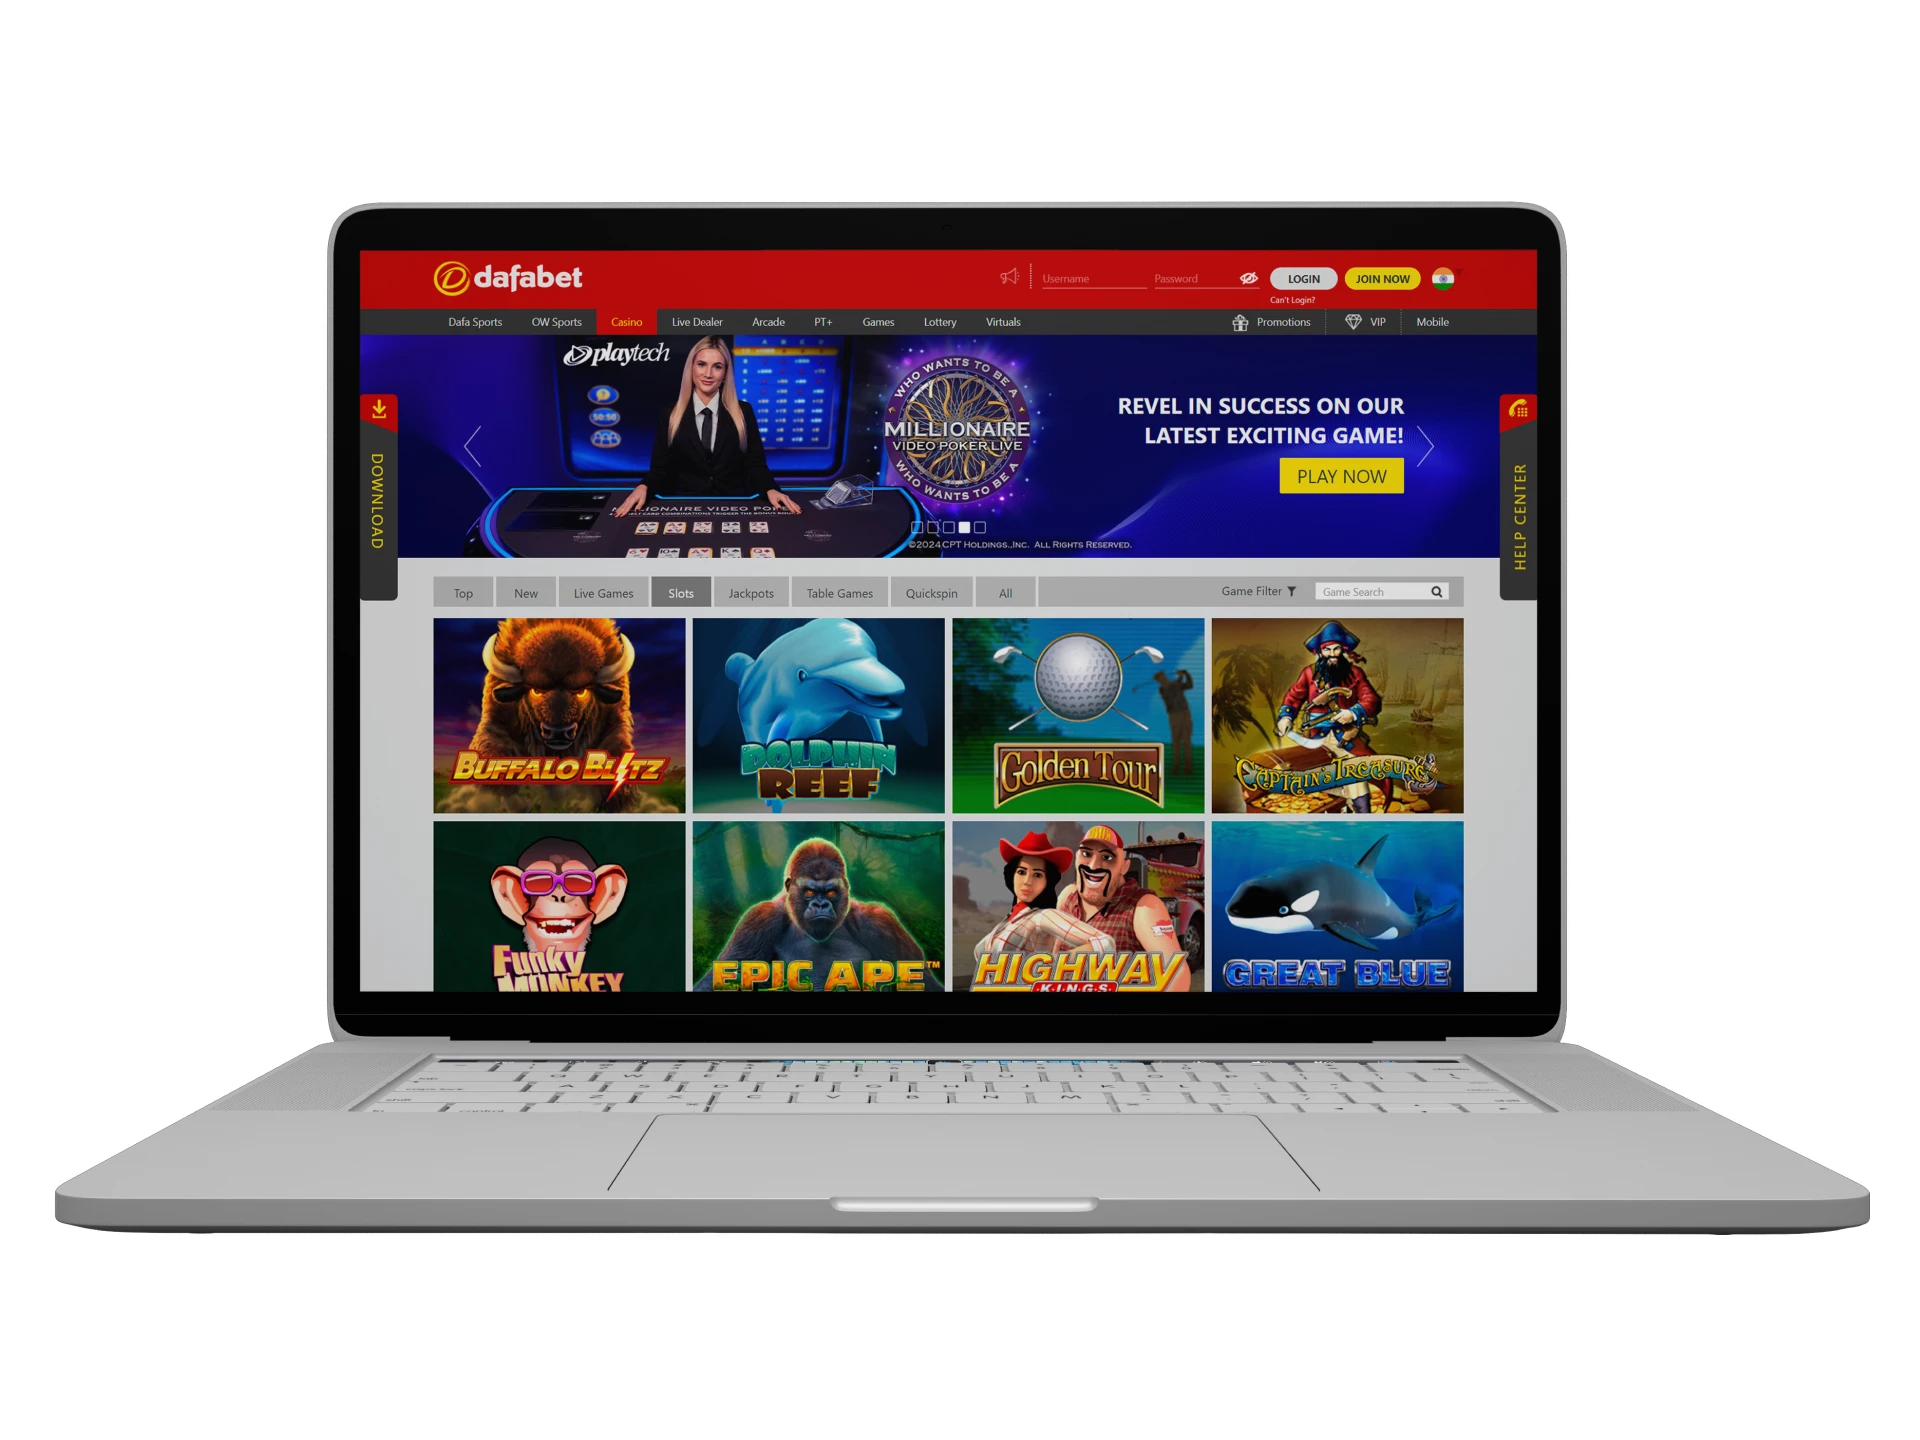 Try your luck in Dafabet slot games.